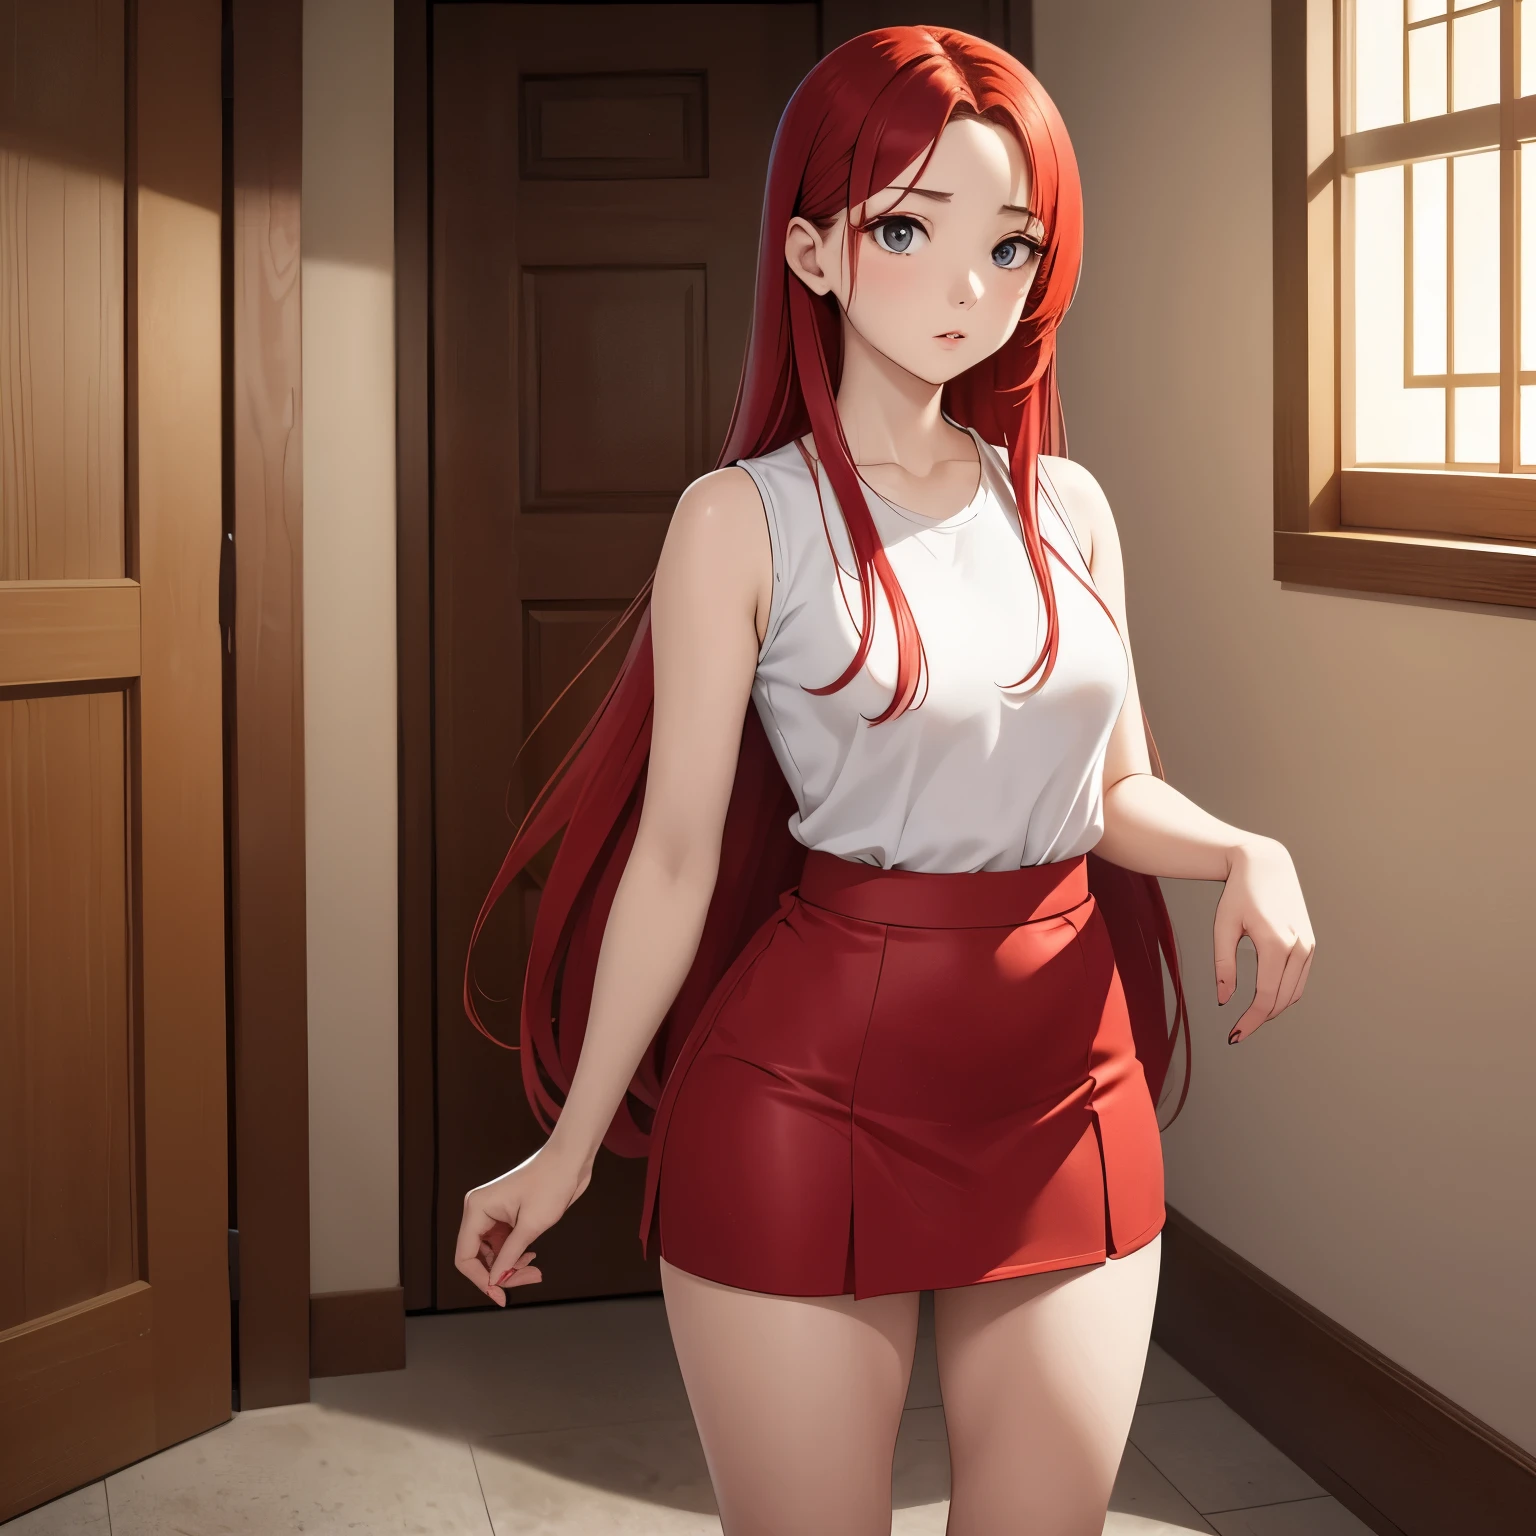 a young adult of Asian descent. she has long red hair, and her eyes are gray. she has a developed body with small breasts and wide hips. She has white skin and wears a short skirt with a white, low-cut, sleeveless shirt. The setting is a small room without many things, with a floor made of brown ceramics.